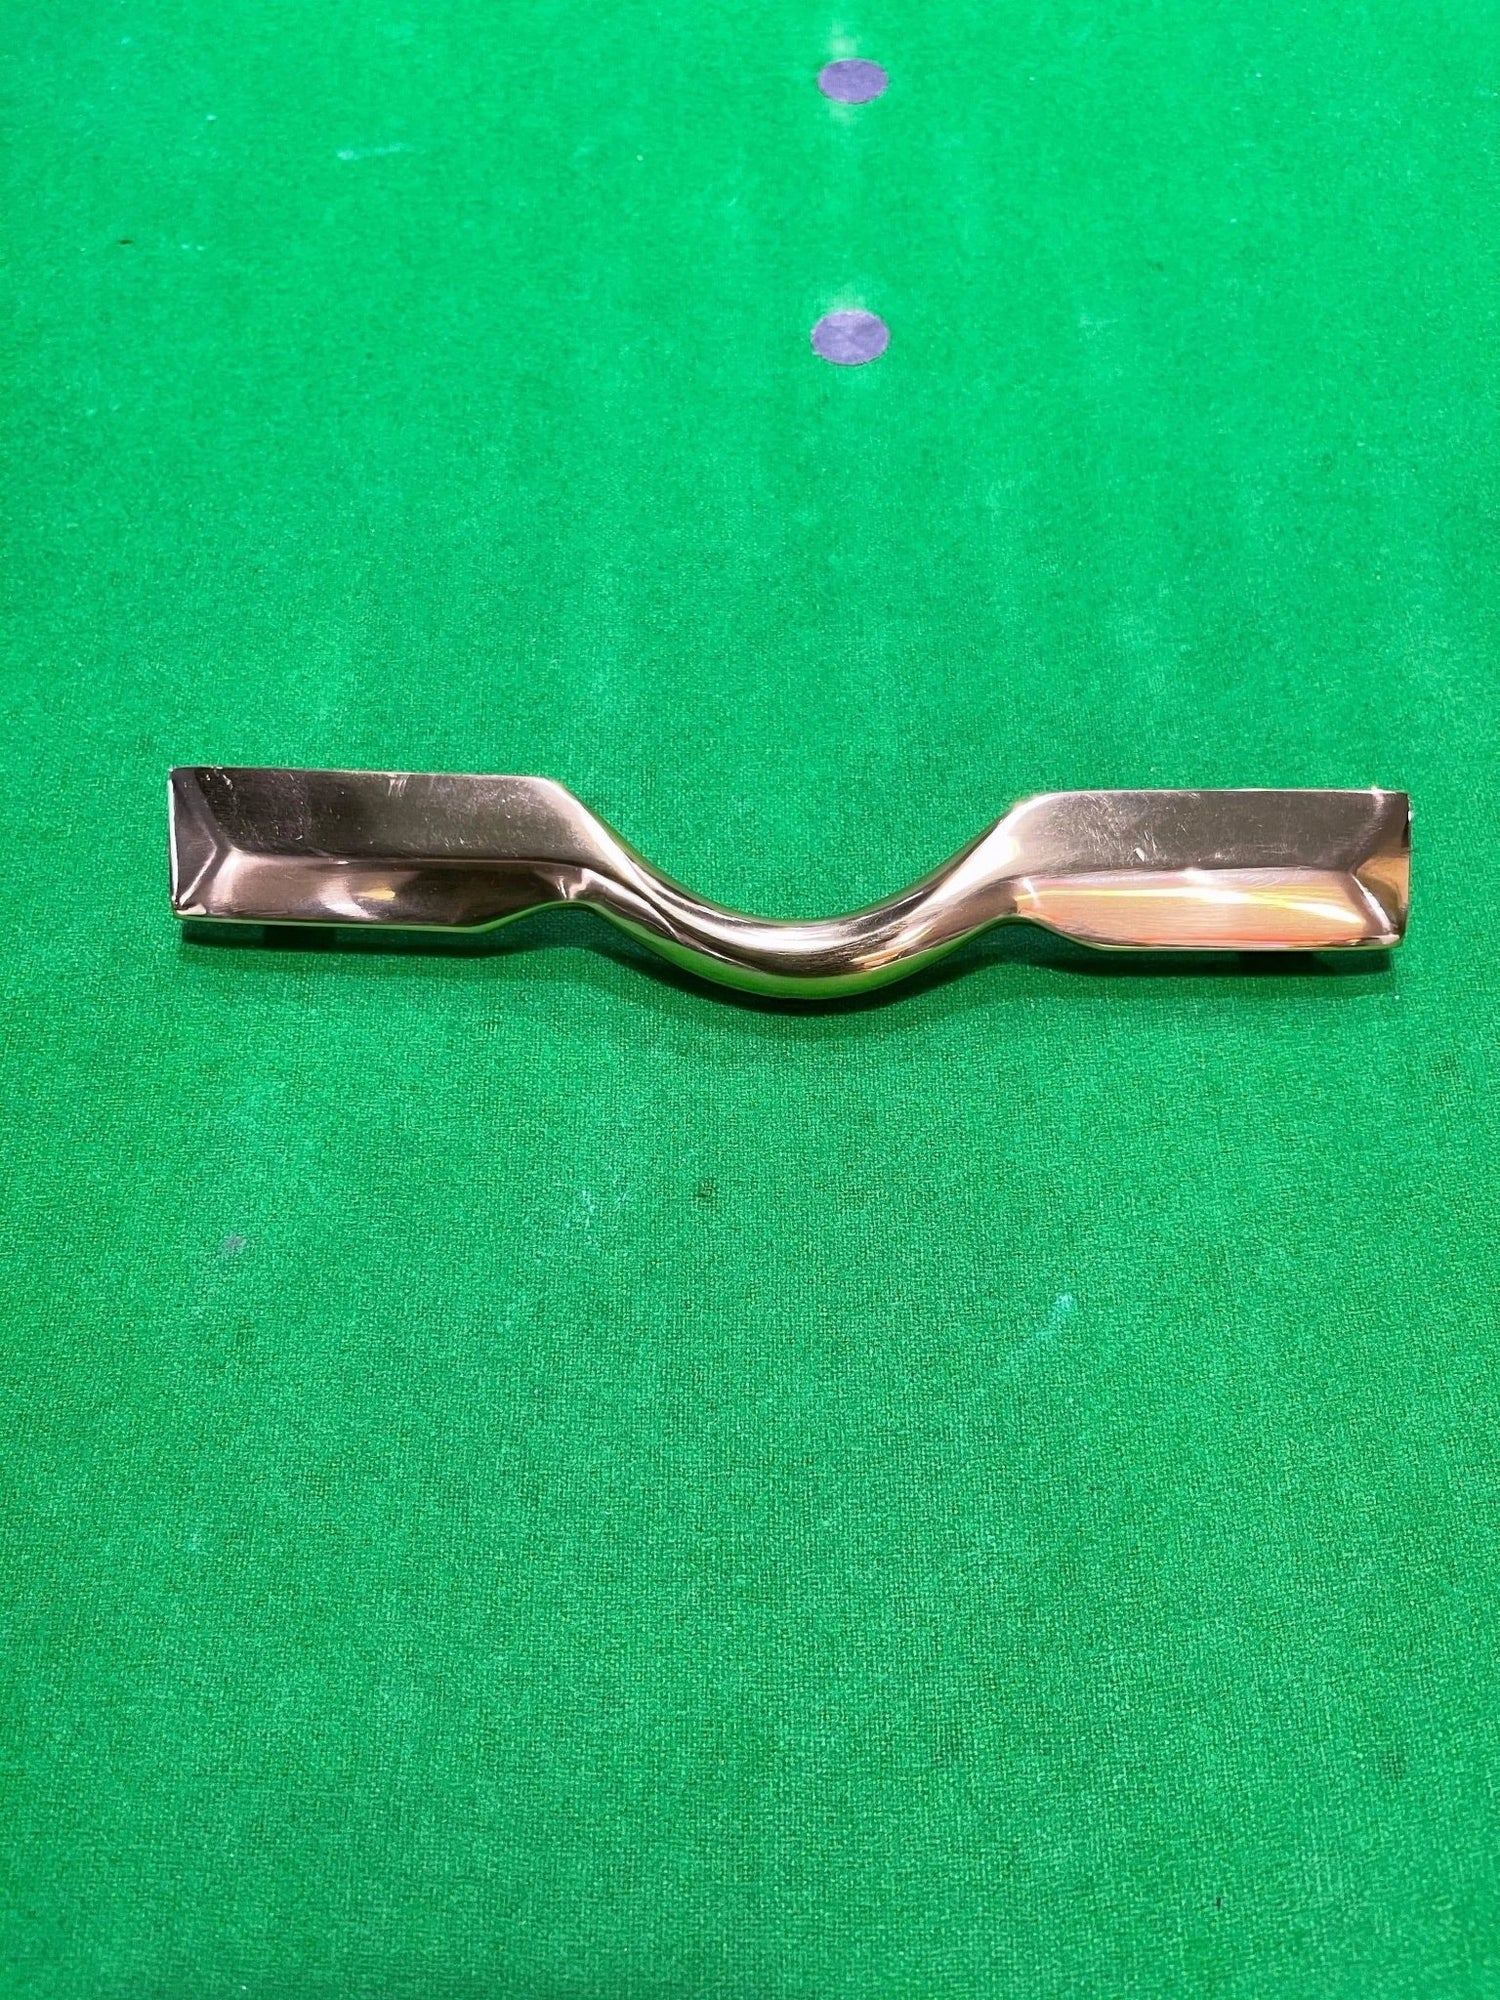 Deluxe Quality Solid Pool, Snooker, Billiard Table Pocket Brackets - 1350 Flat Bolt Down - Q-Masters